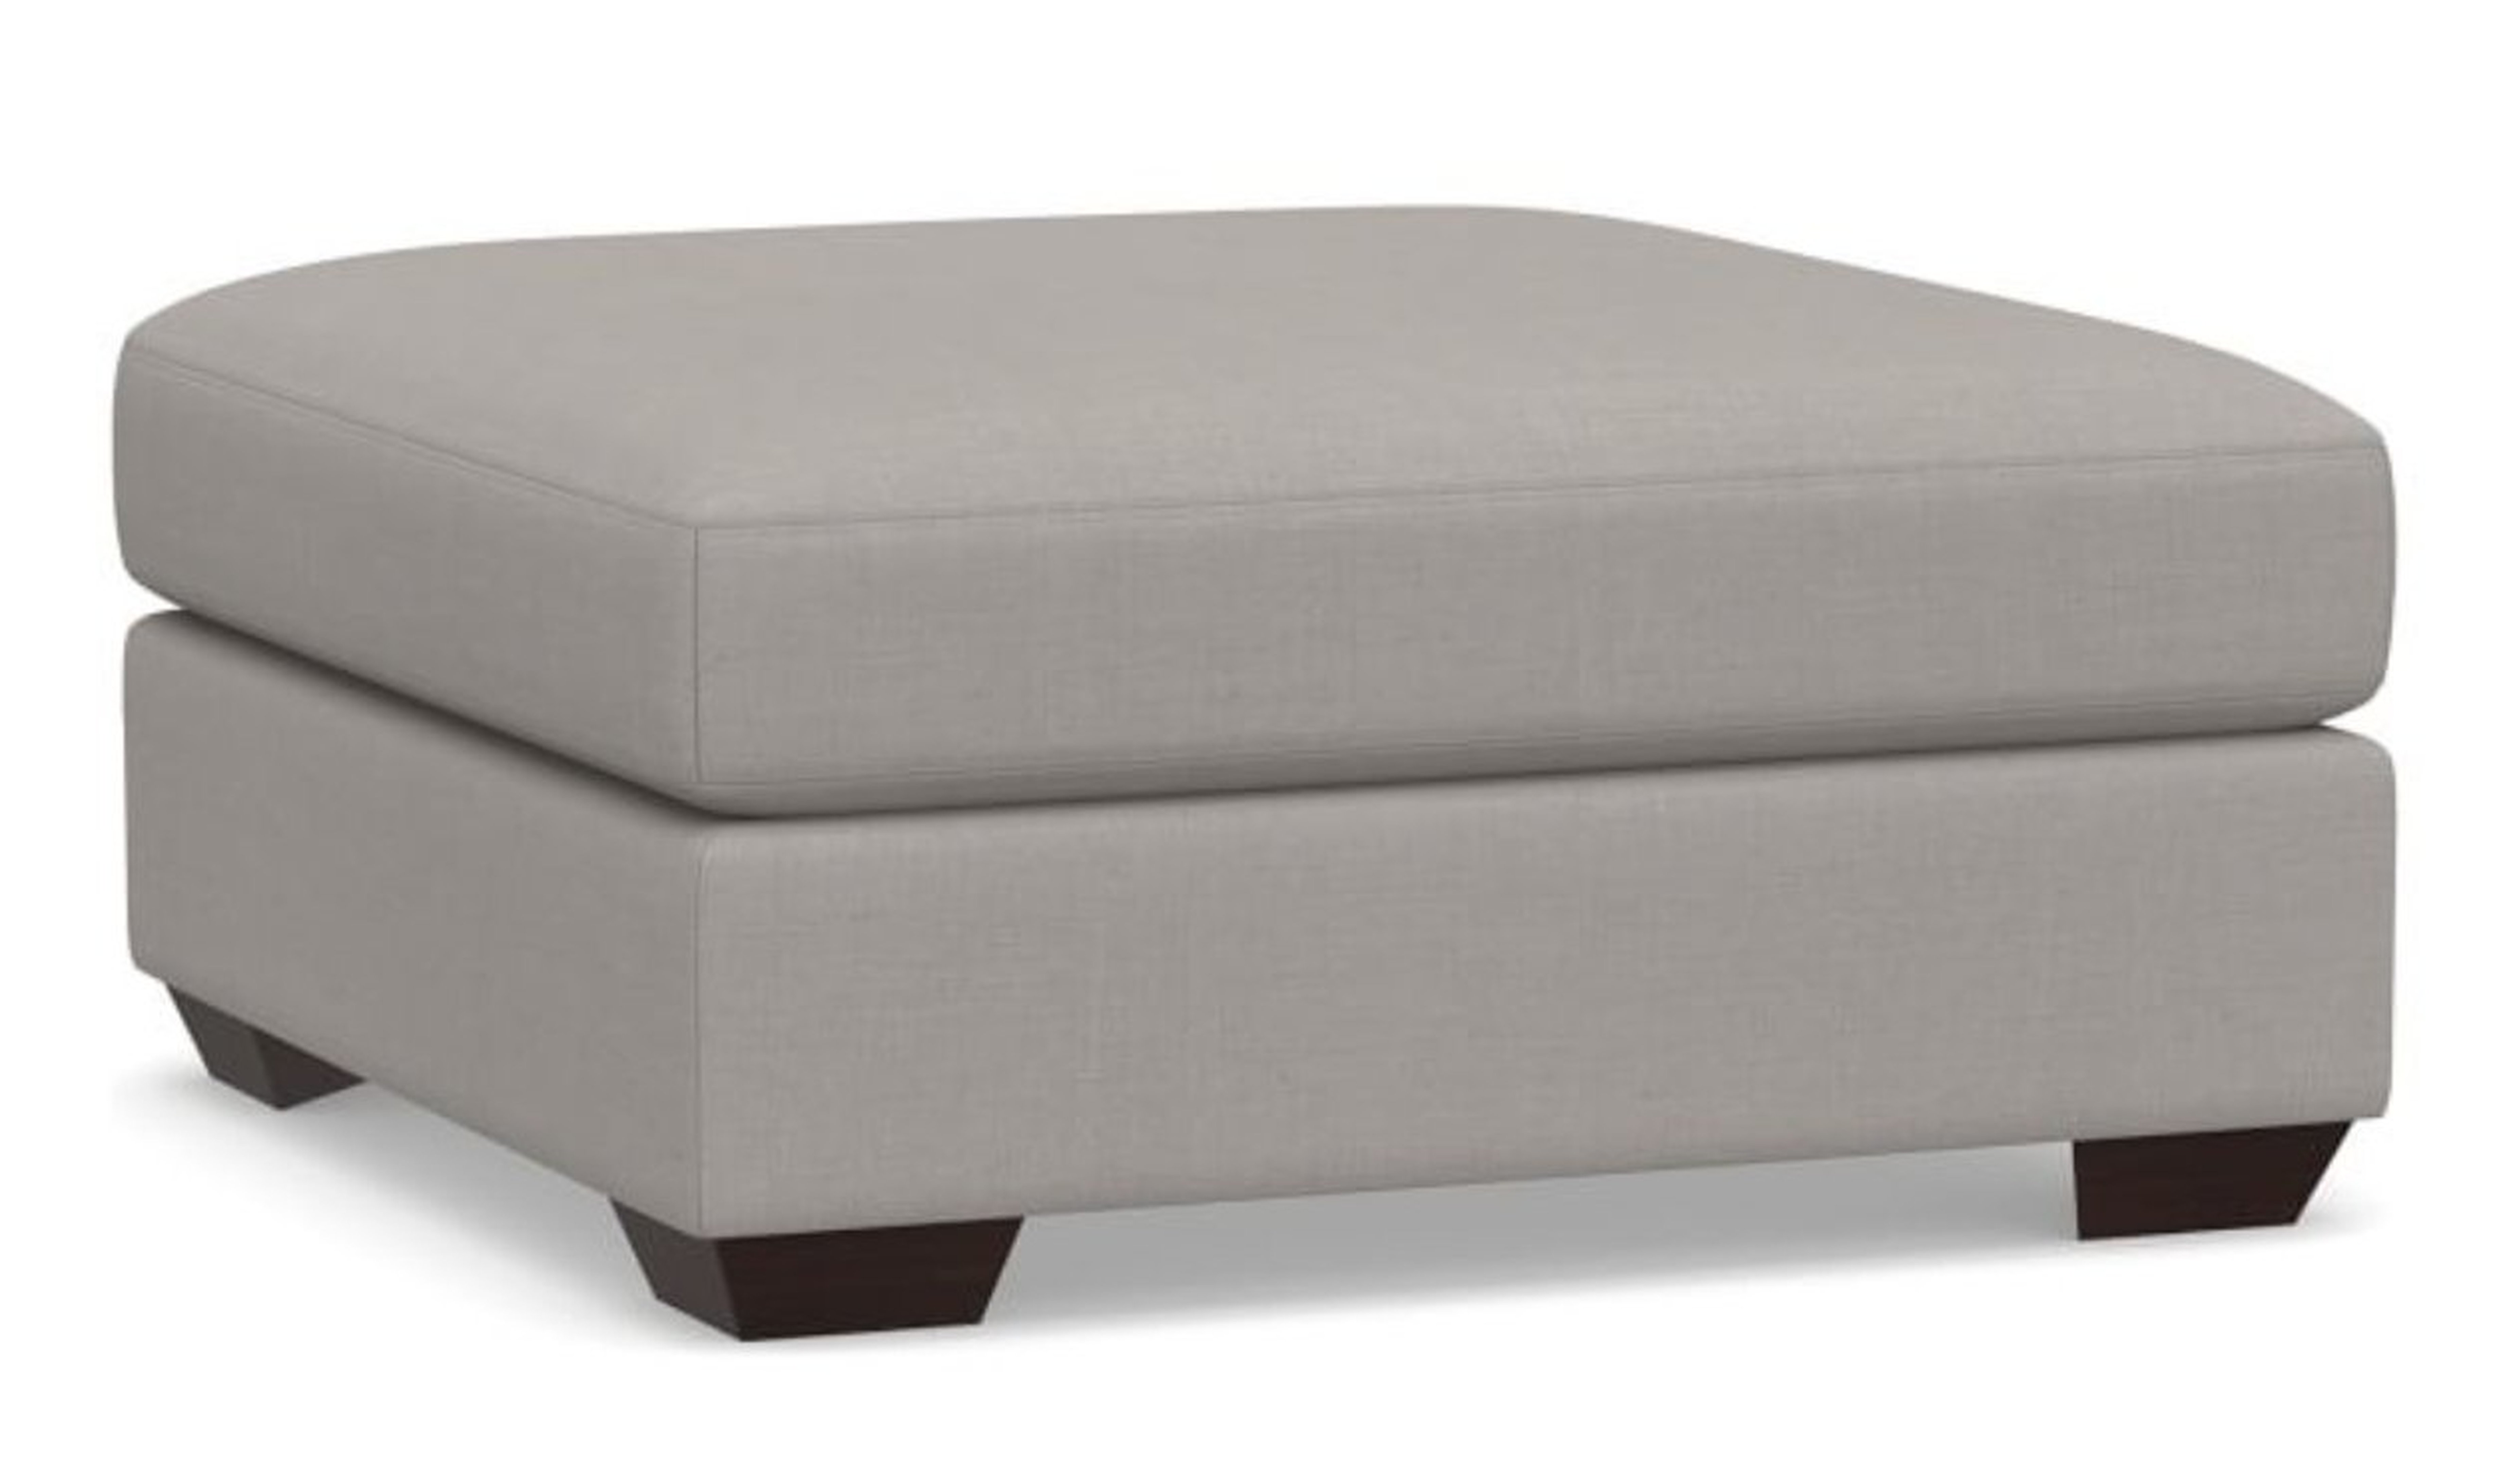 Big Sur Square Arm Upholstered Sectional Floater Ottoman, Down Blend Wrapped Cushions, Belgian Linen Light Gray - Pottery Barn